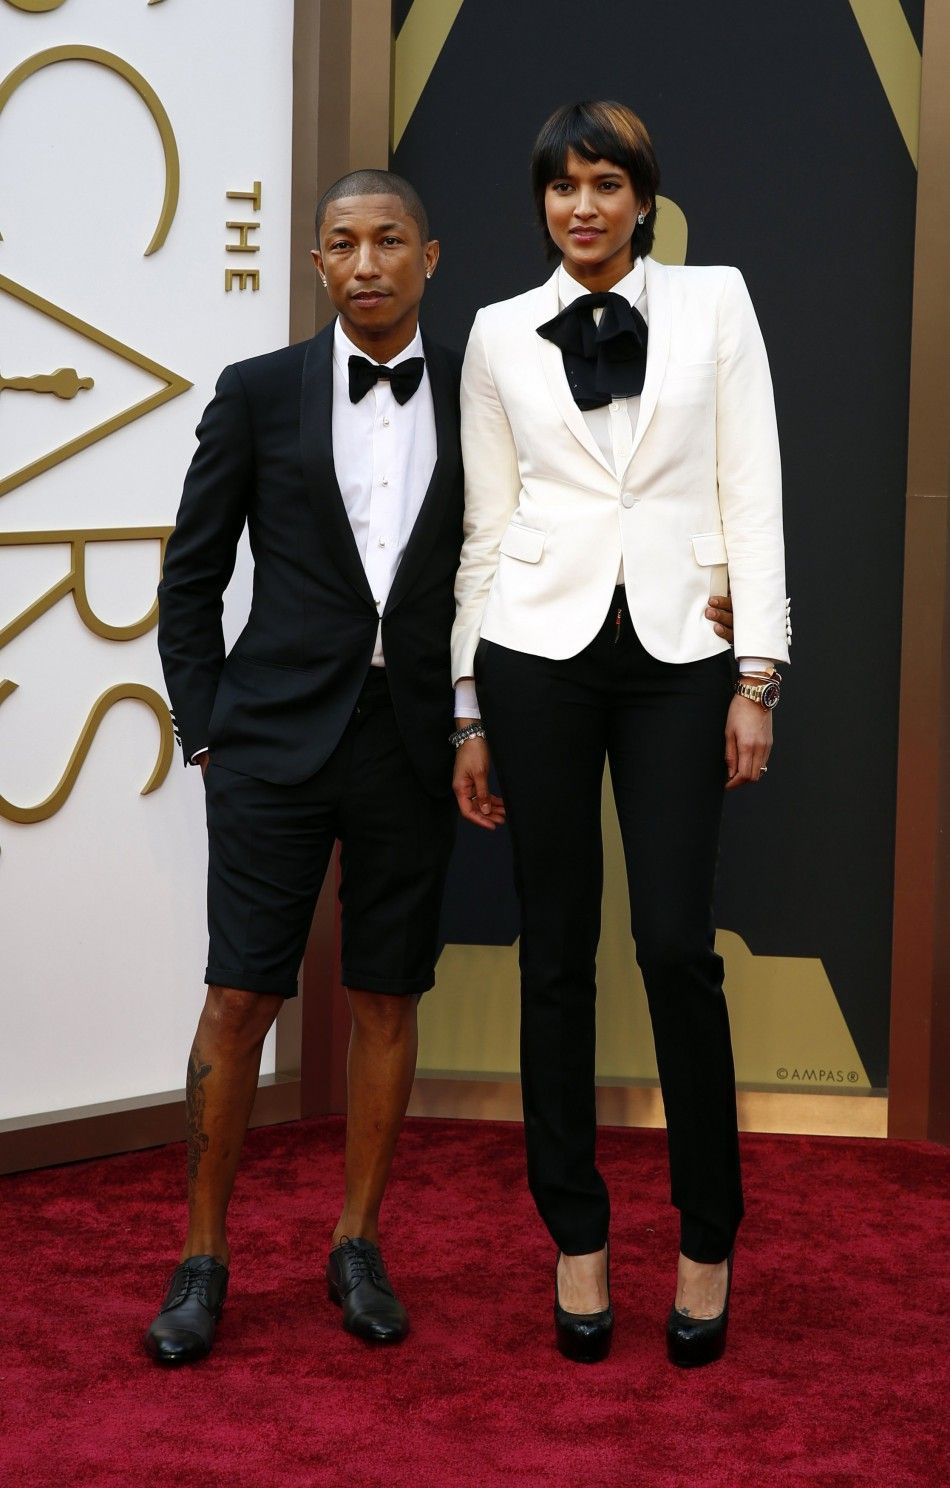 Singer Pharrell WIlliams, wearing a Lanvin suit with shorts, arrives with wife, Helen Lasichanh, at the 86th Academy Awards in Hollywood